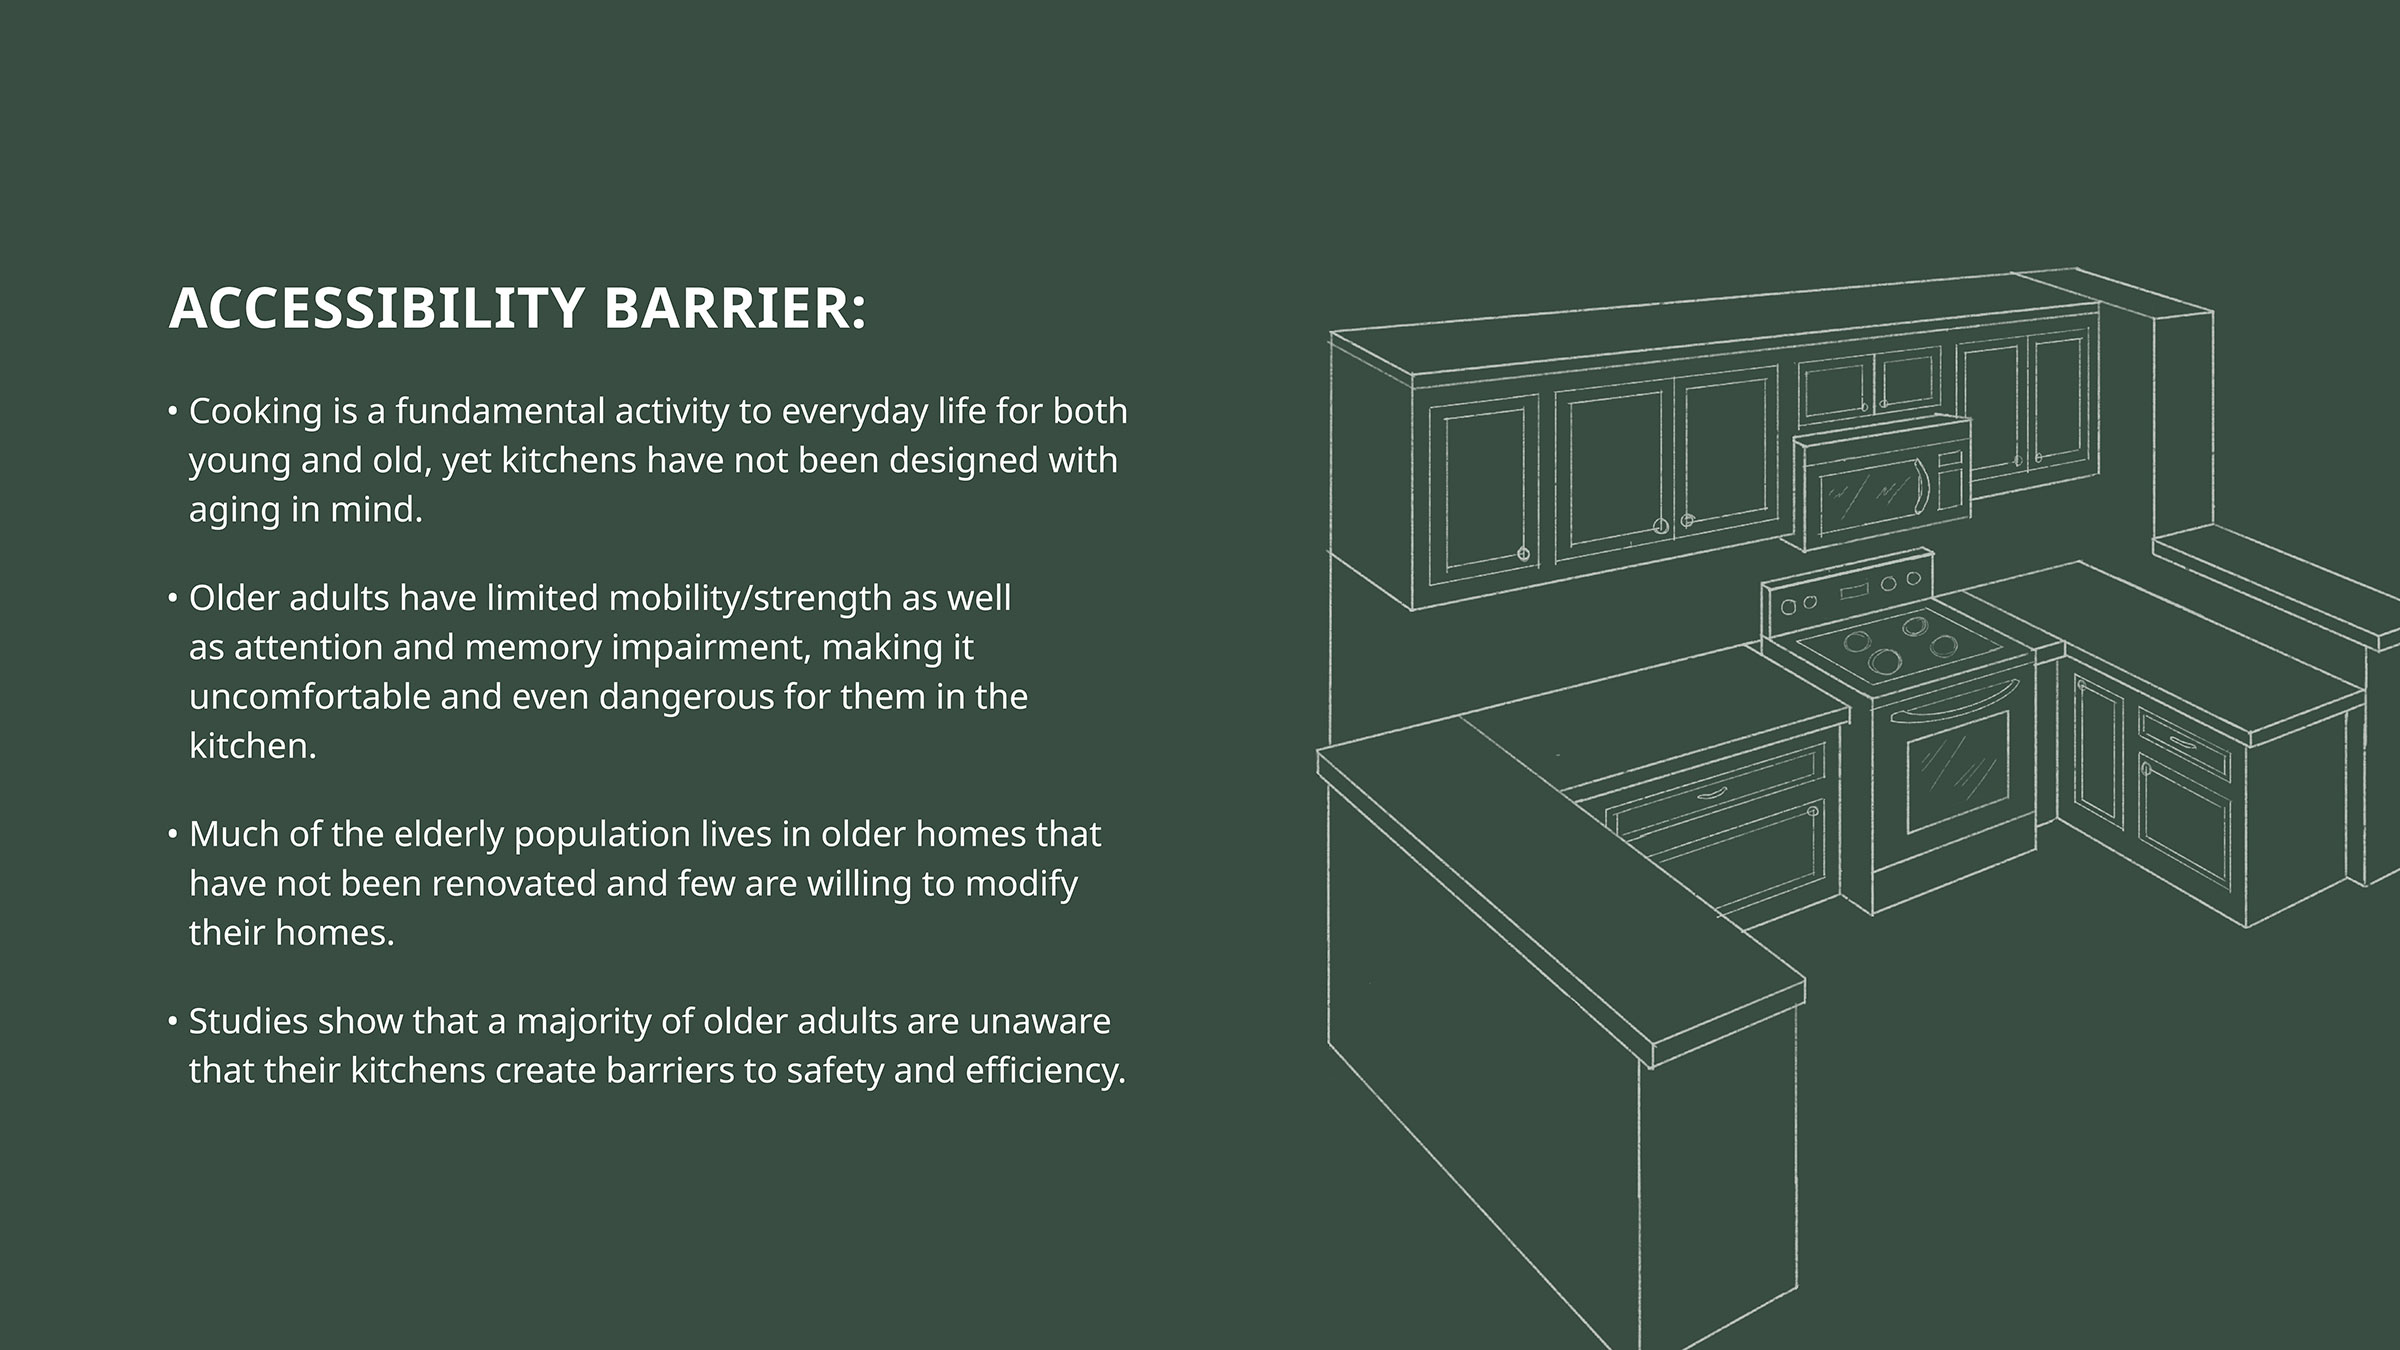 Title: Accessibility Barrier. Bullet 1: Kitchens have not been designed with aging in mind. Bullet 2: Older adults have limited mobility/strength, as well as attention and memory impairment, making it uncomfortable and even dangerous for them in the kitchen. Bullet 3: Much of the elderly population lives in older homes that have not been renovated and few are willing to modify their homes. Bullet 4: Studies show that a majority of older adults are unaware that their kitchens create barriers to safety and efficiency.